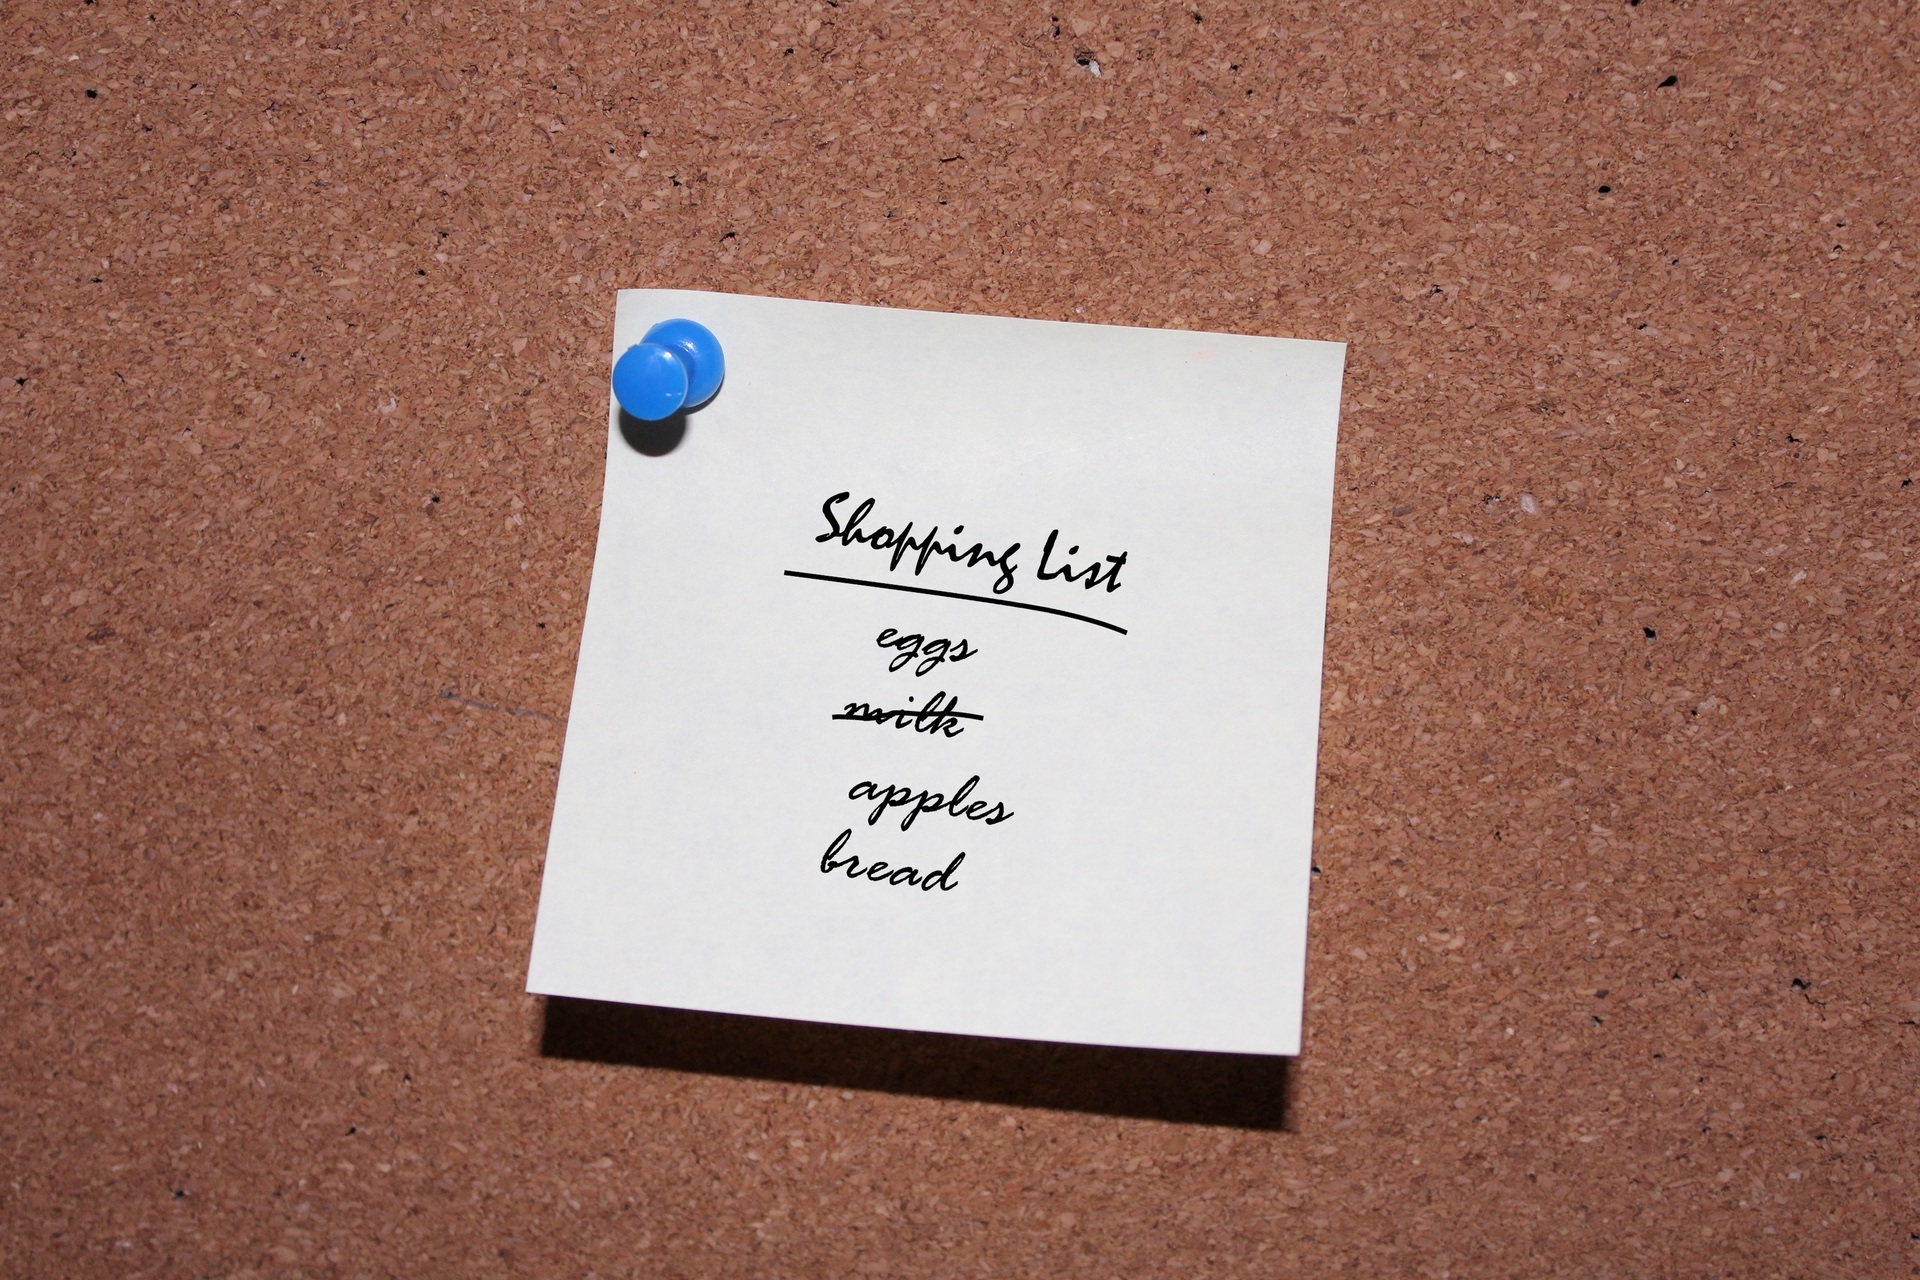 Image of shopping list on note tacked to cork board